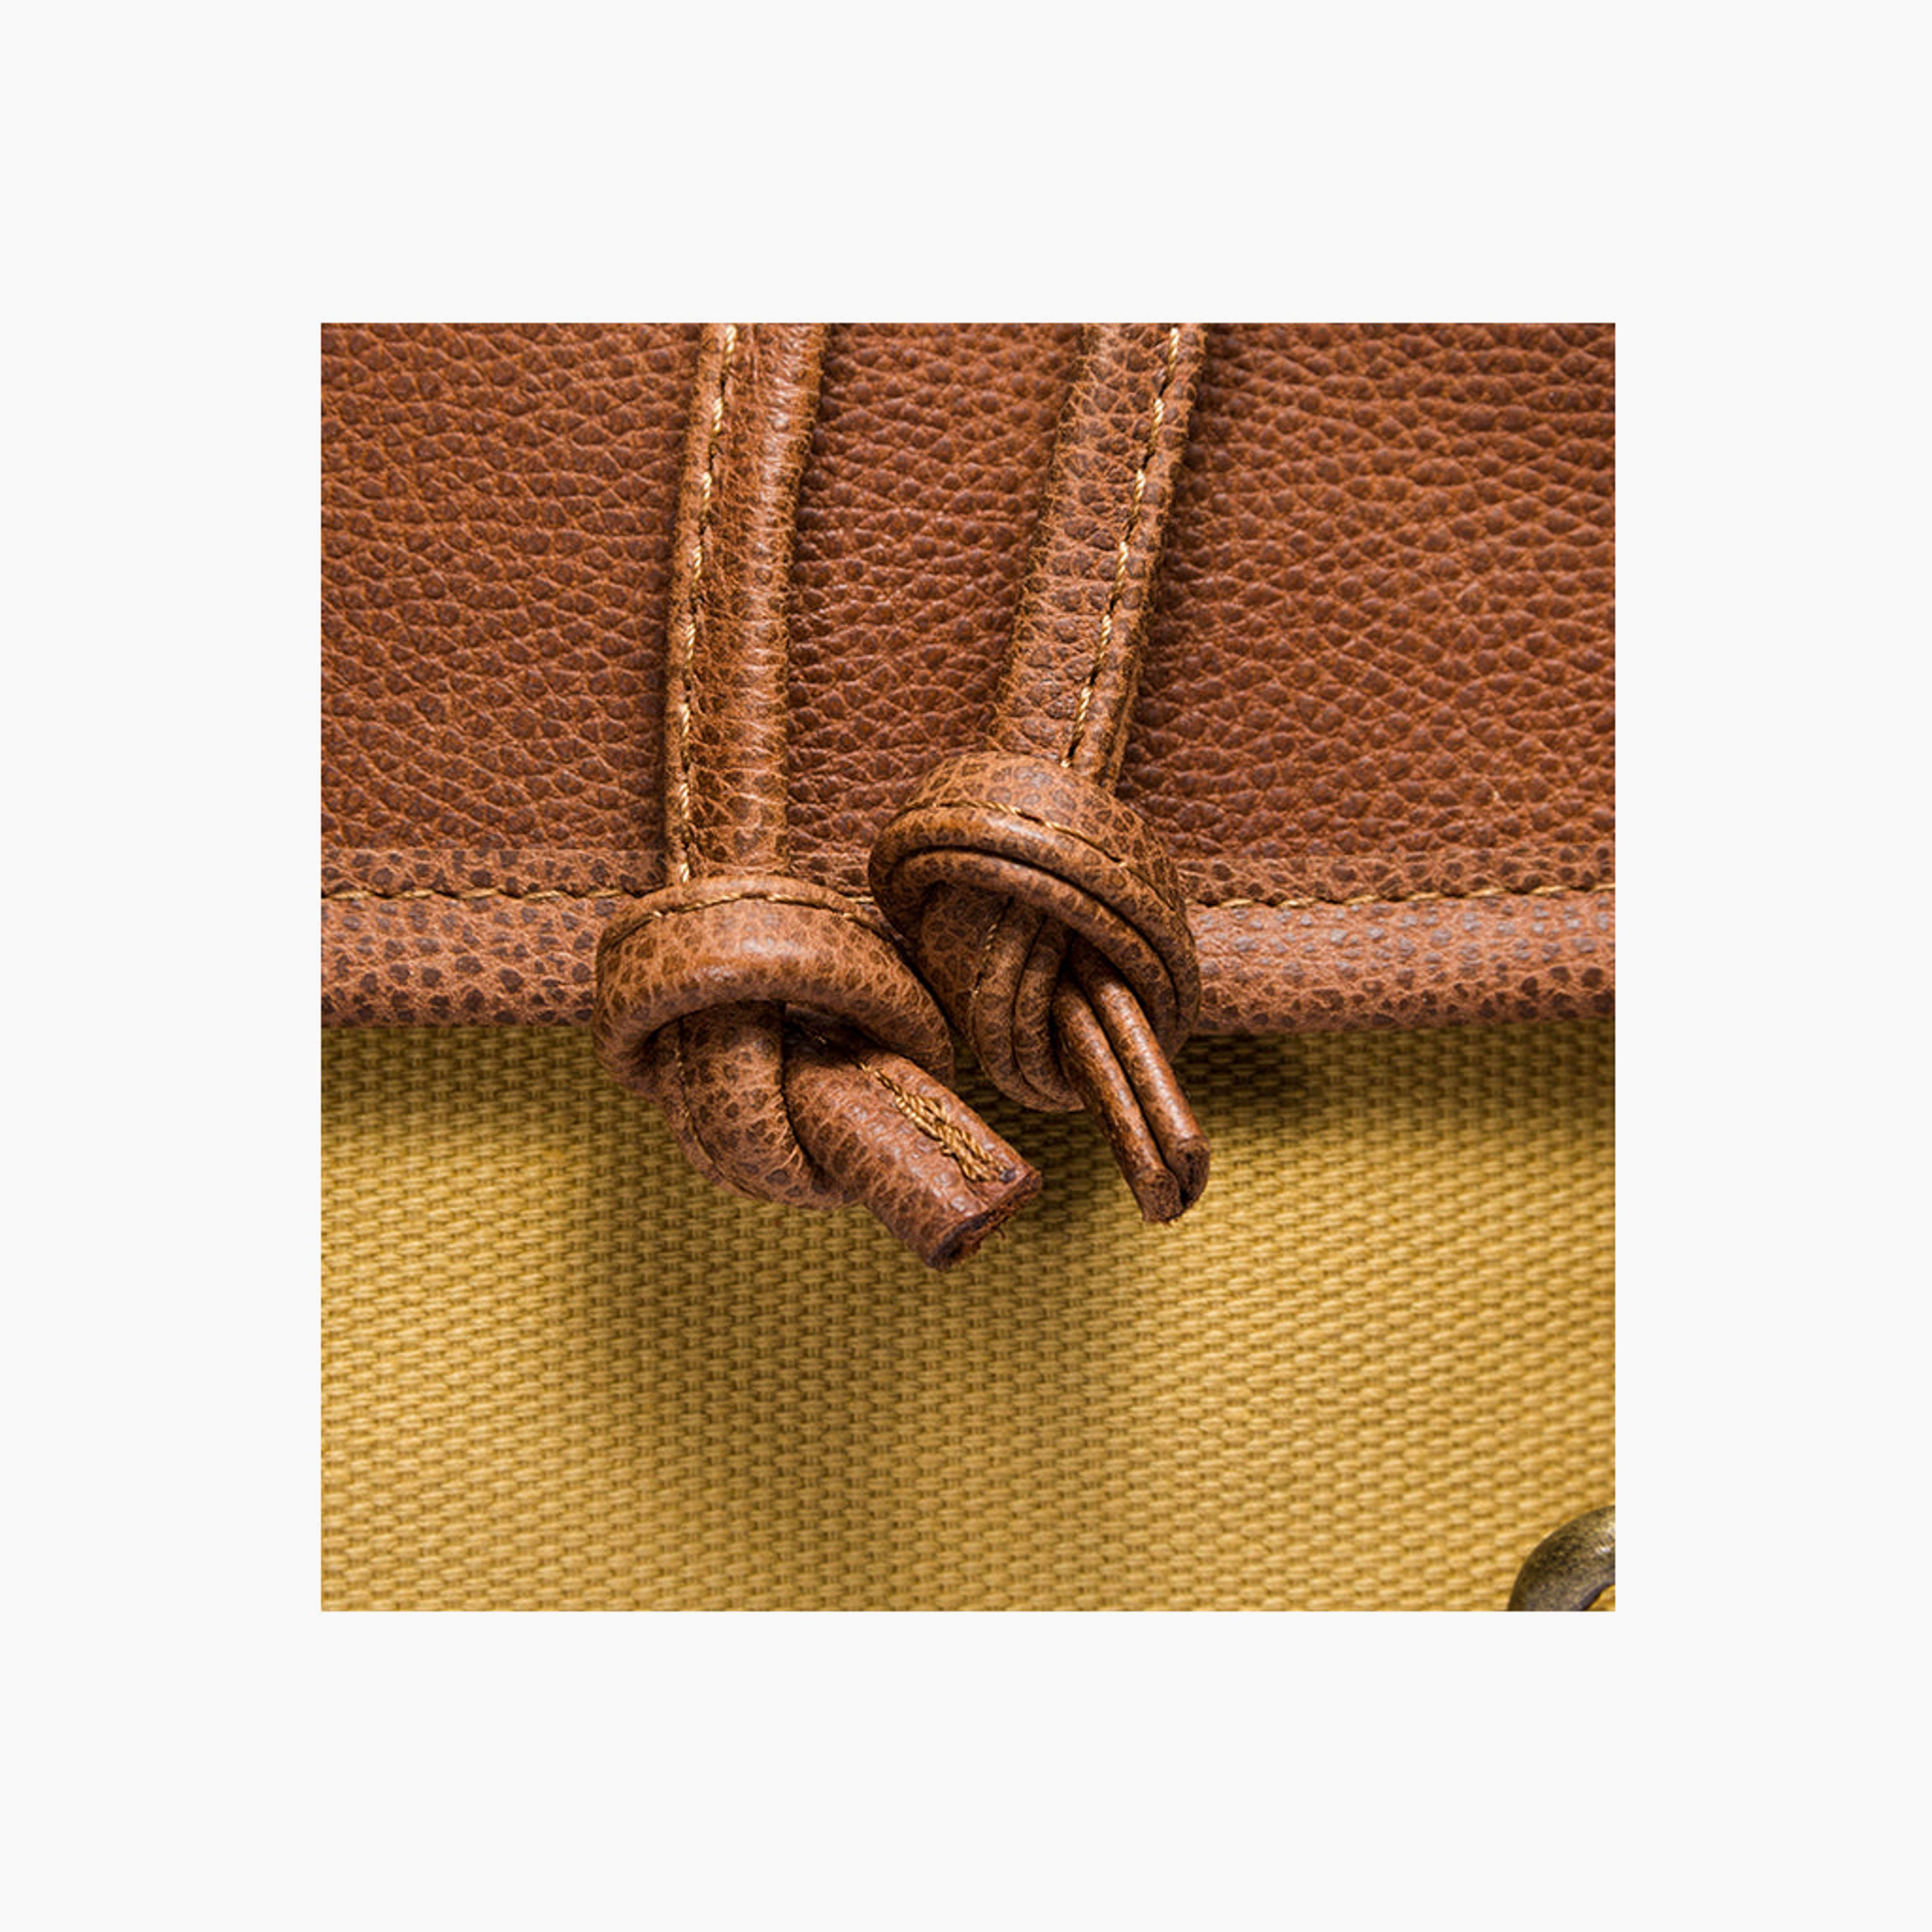 Tomcat | Mustard Yellow | Cotton Canvas | Brown Leather